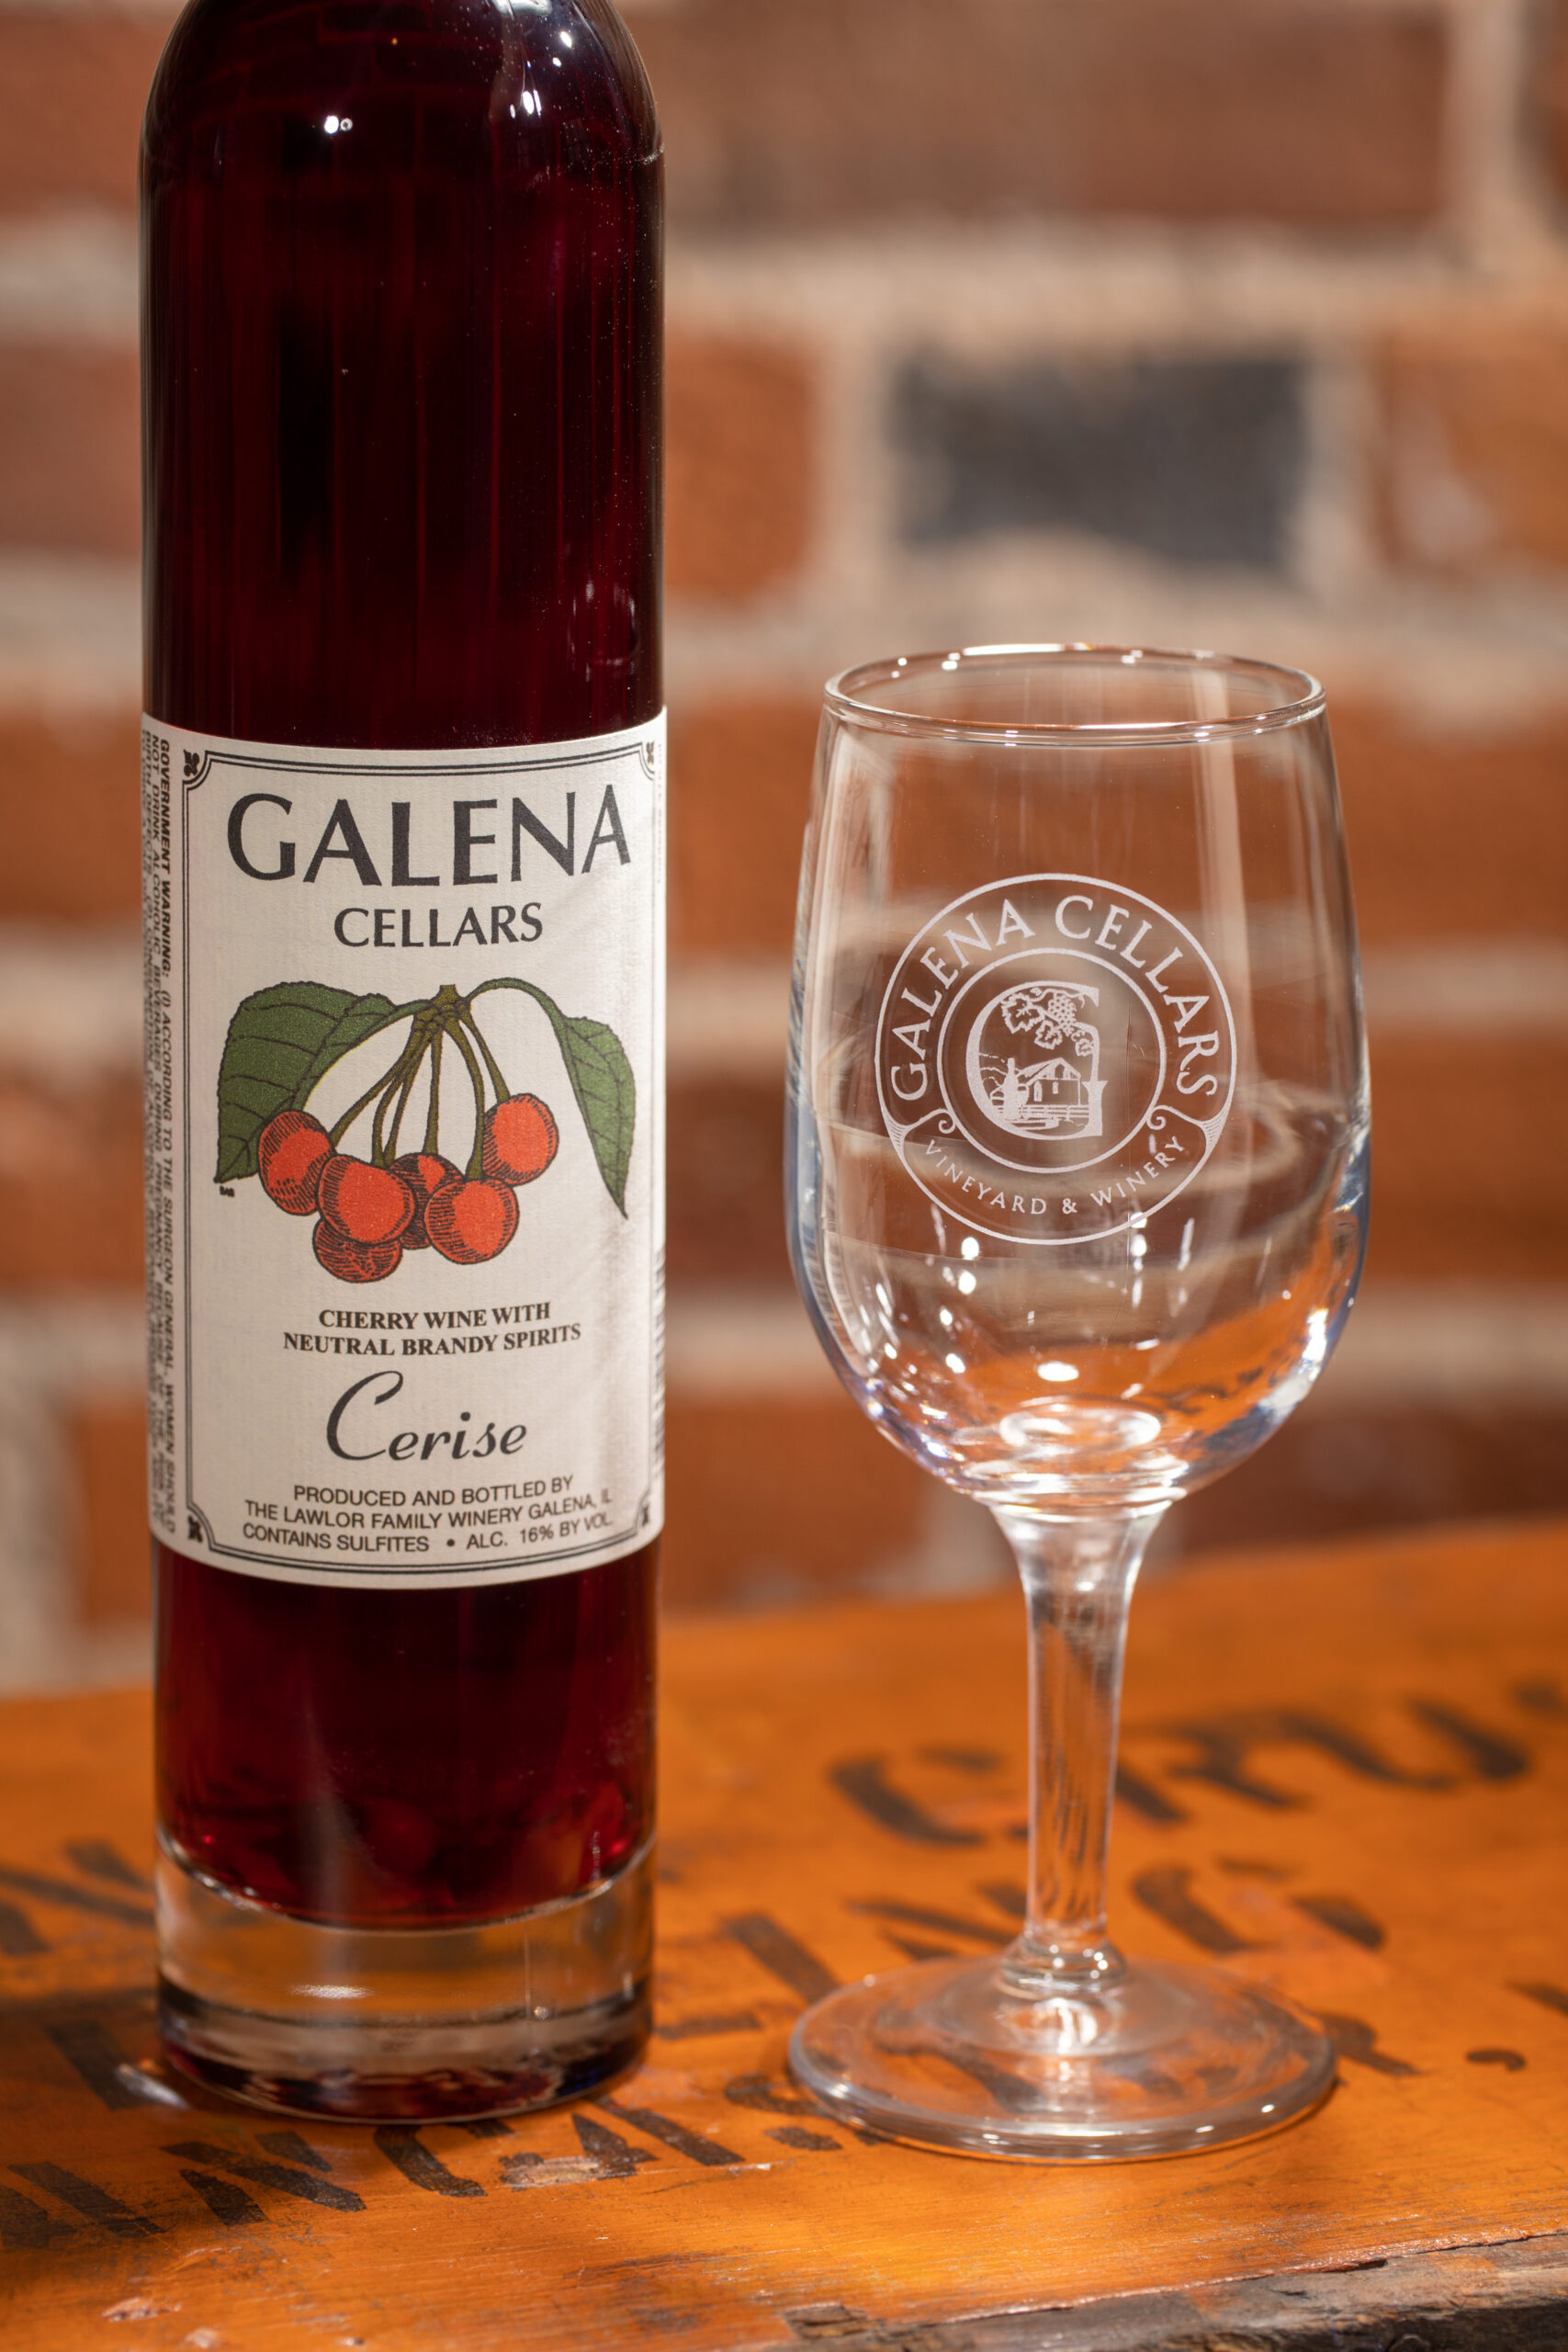 https://galenacellars.com/wp-content/uploads/2021/07/Galena-Cellars-Products-023-scaled.jpg